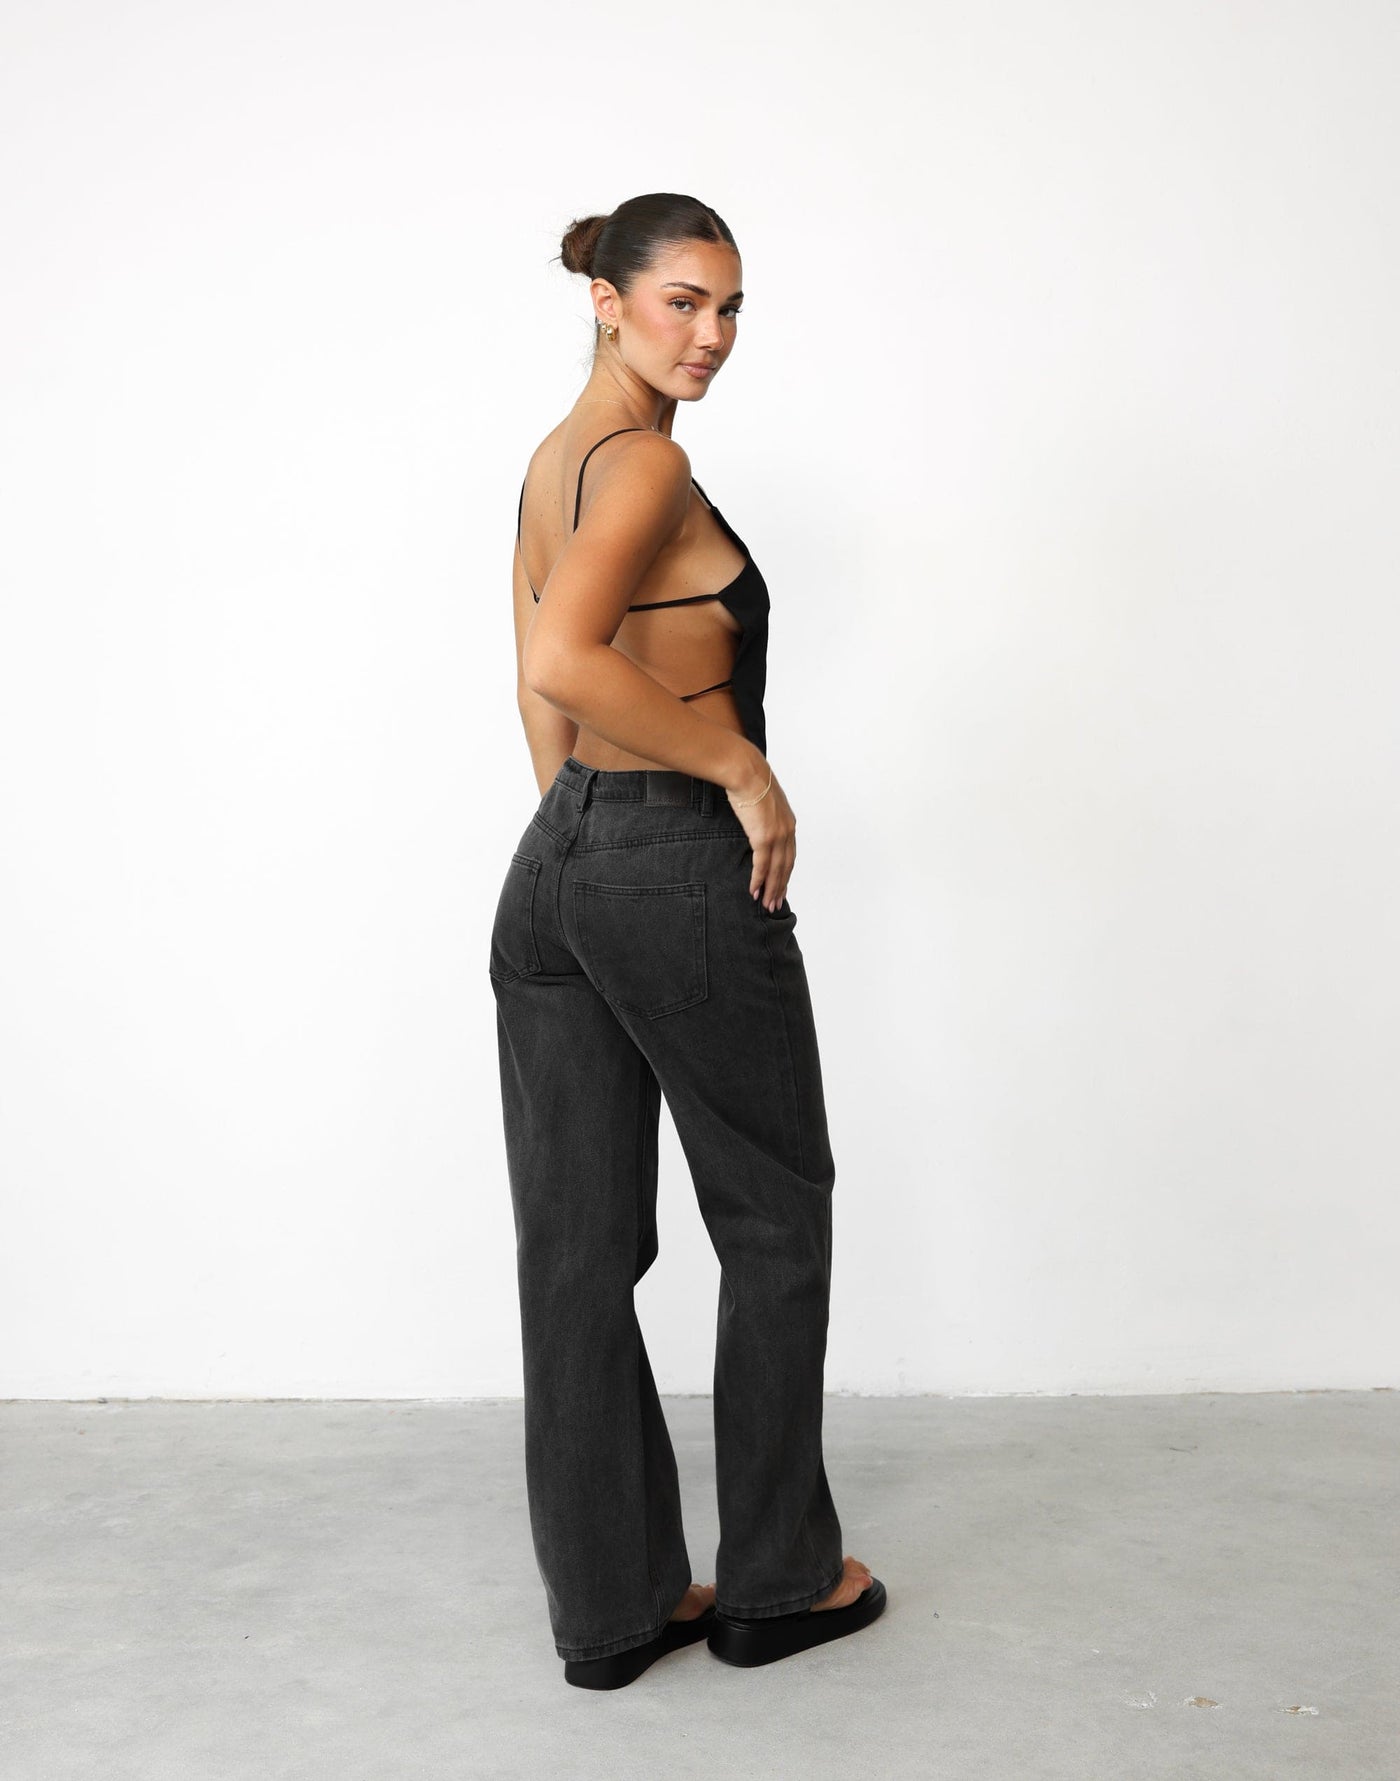 Adeola Top (Black) - Asymmetrical Neckline Backless Top - Women's Top - Charcoal Clothing